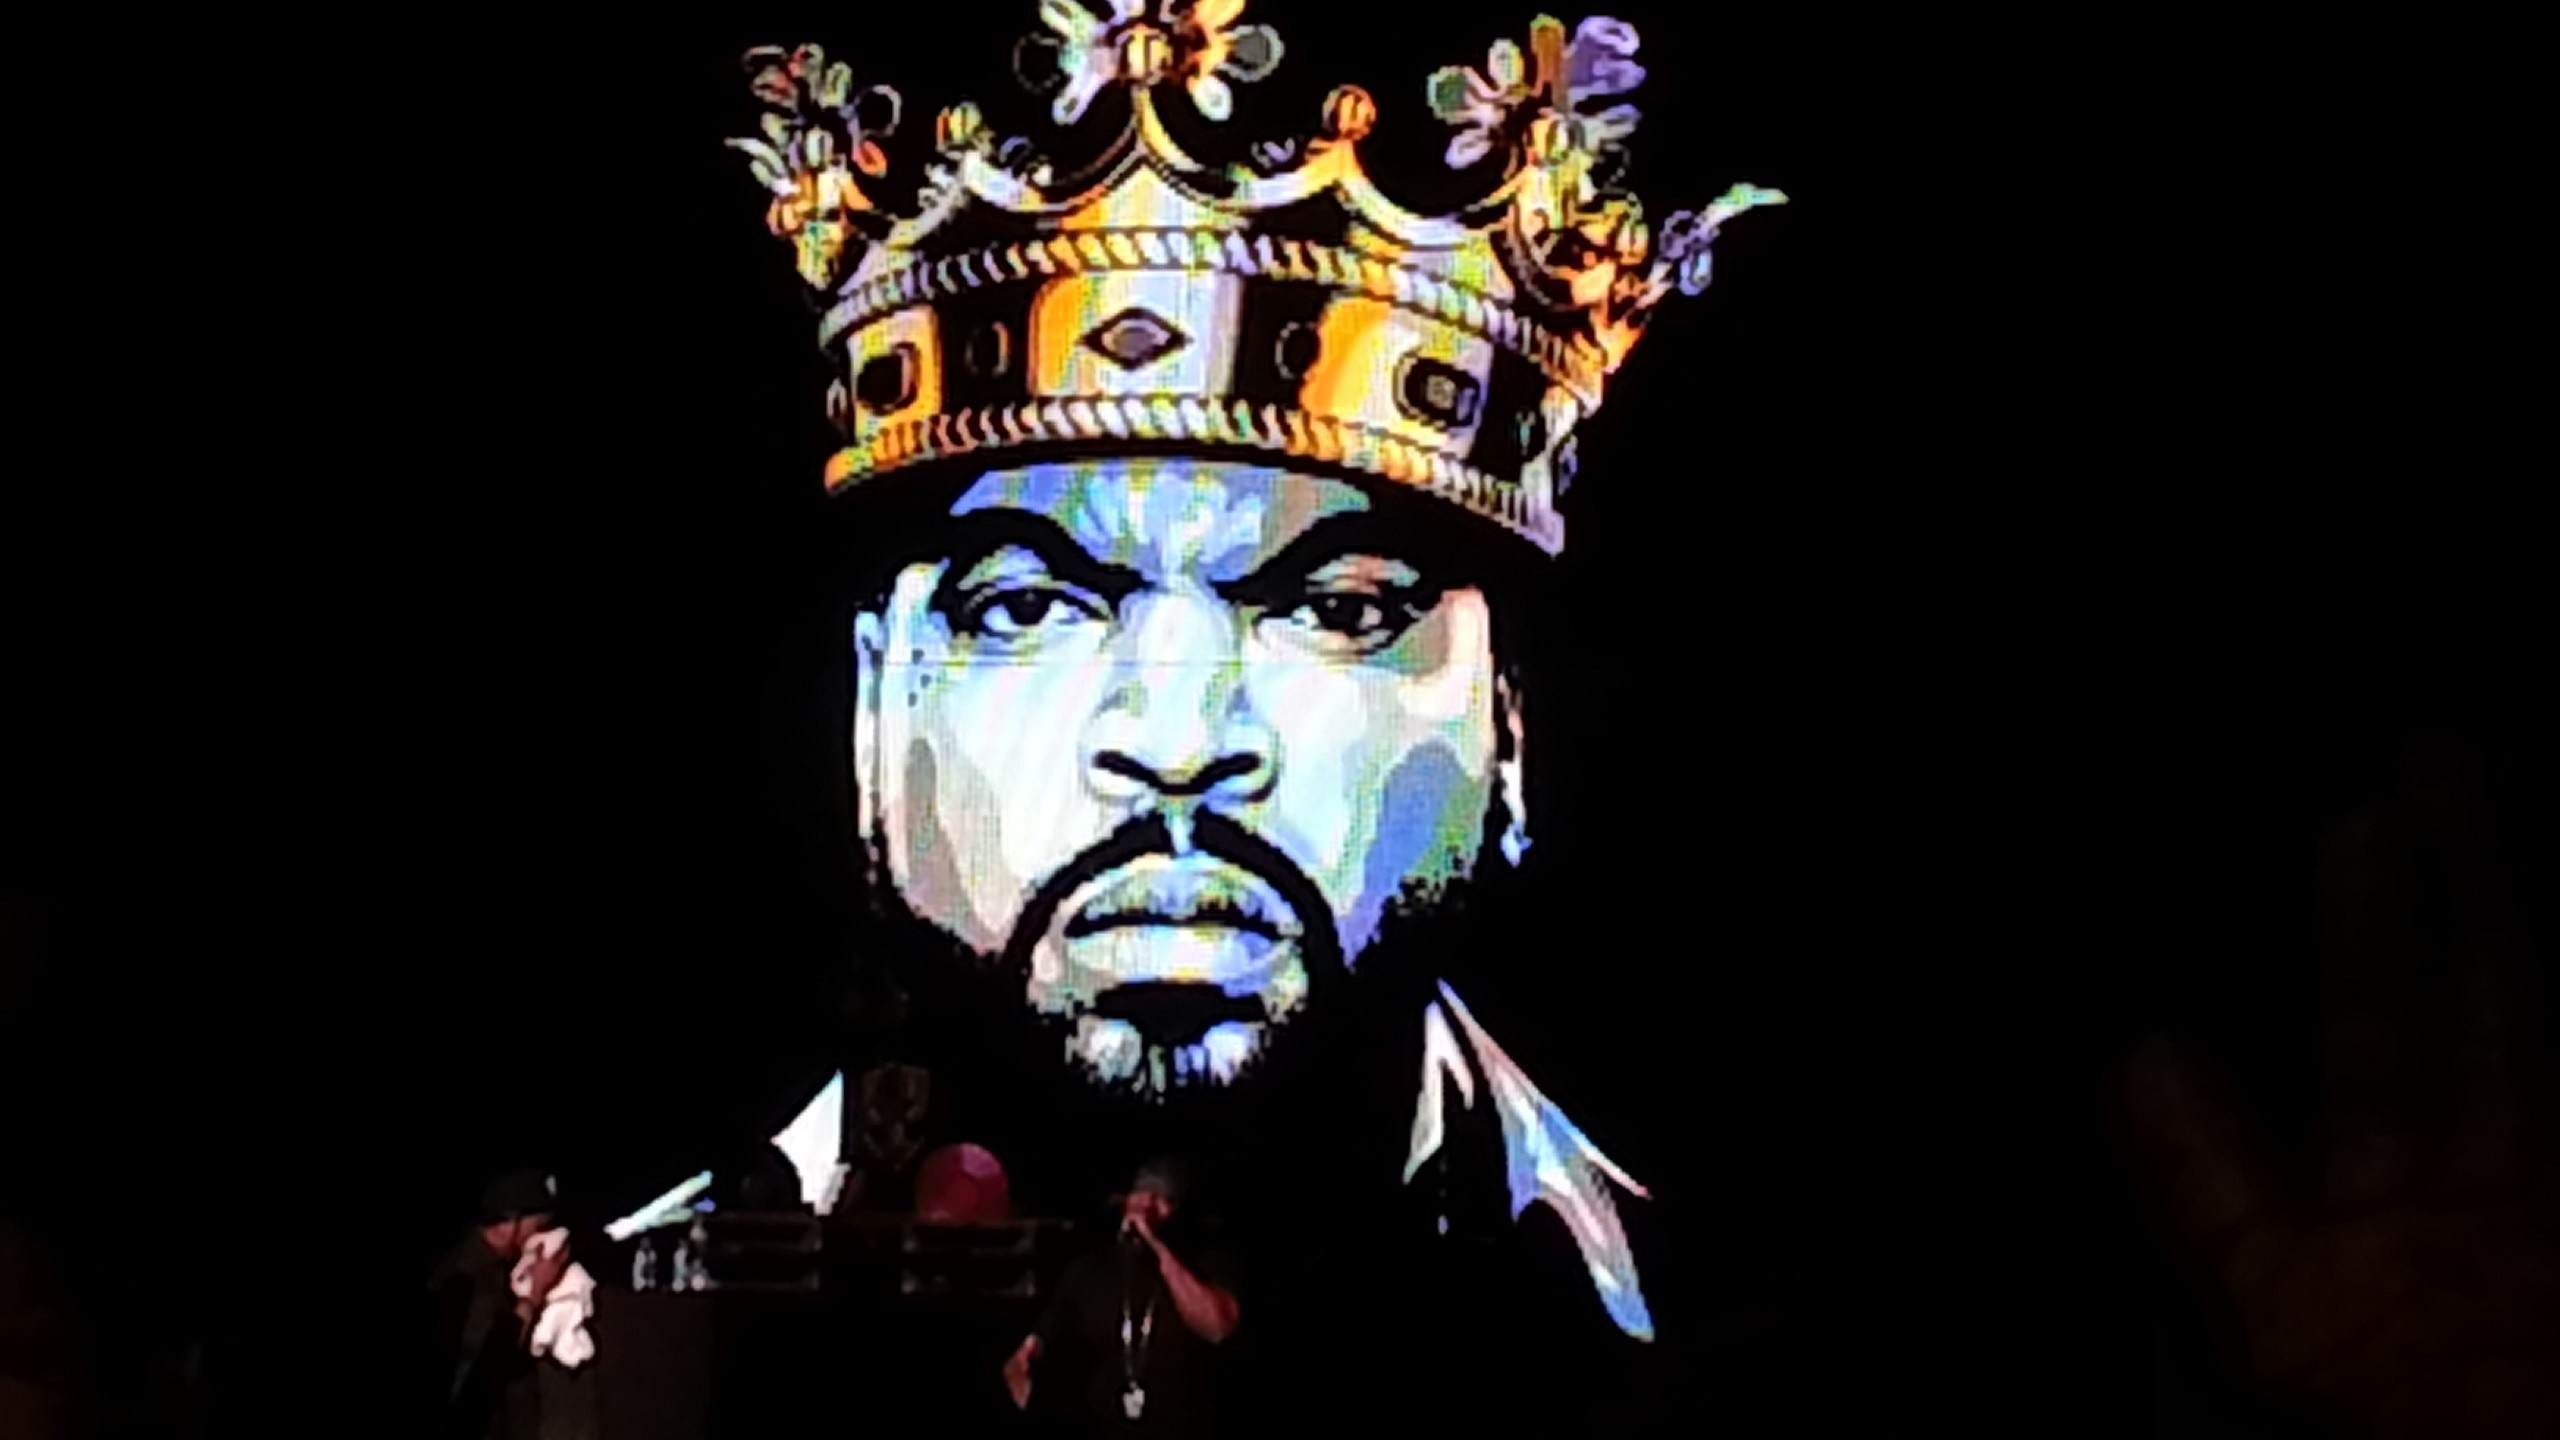 2560x1440 Hip hop singer Ice Cube wallpapers.